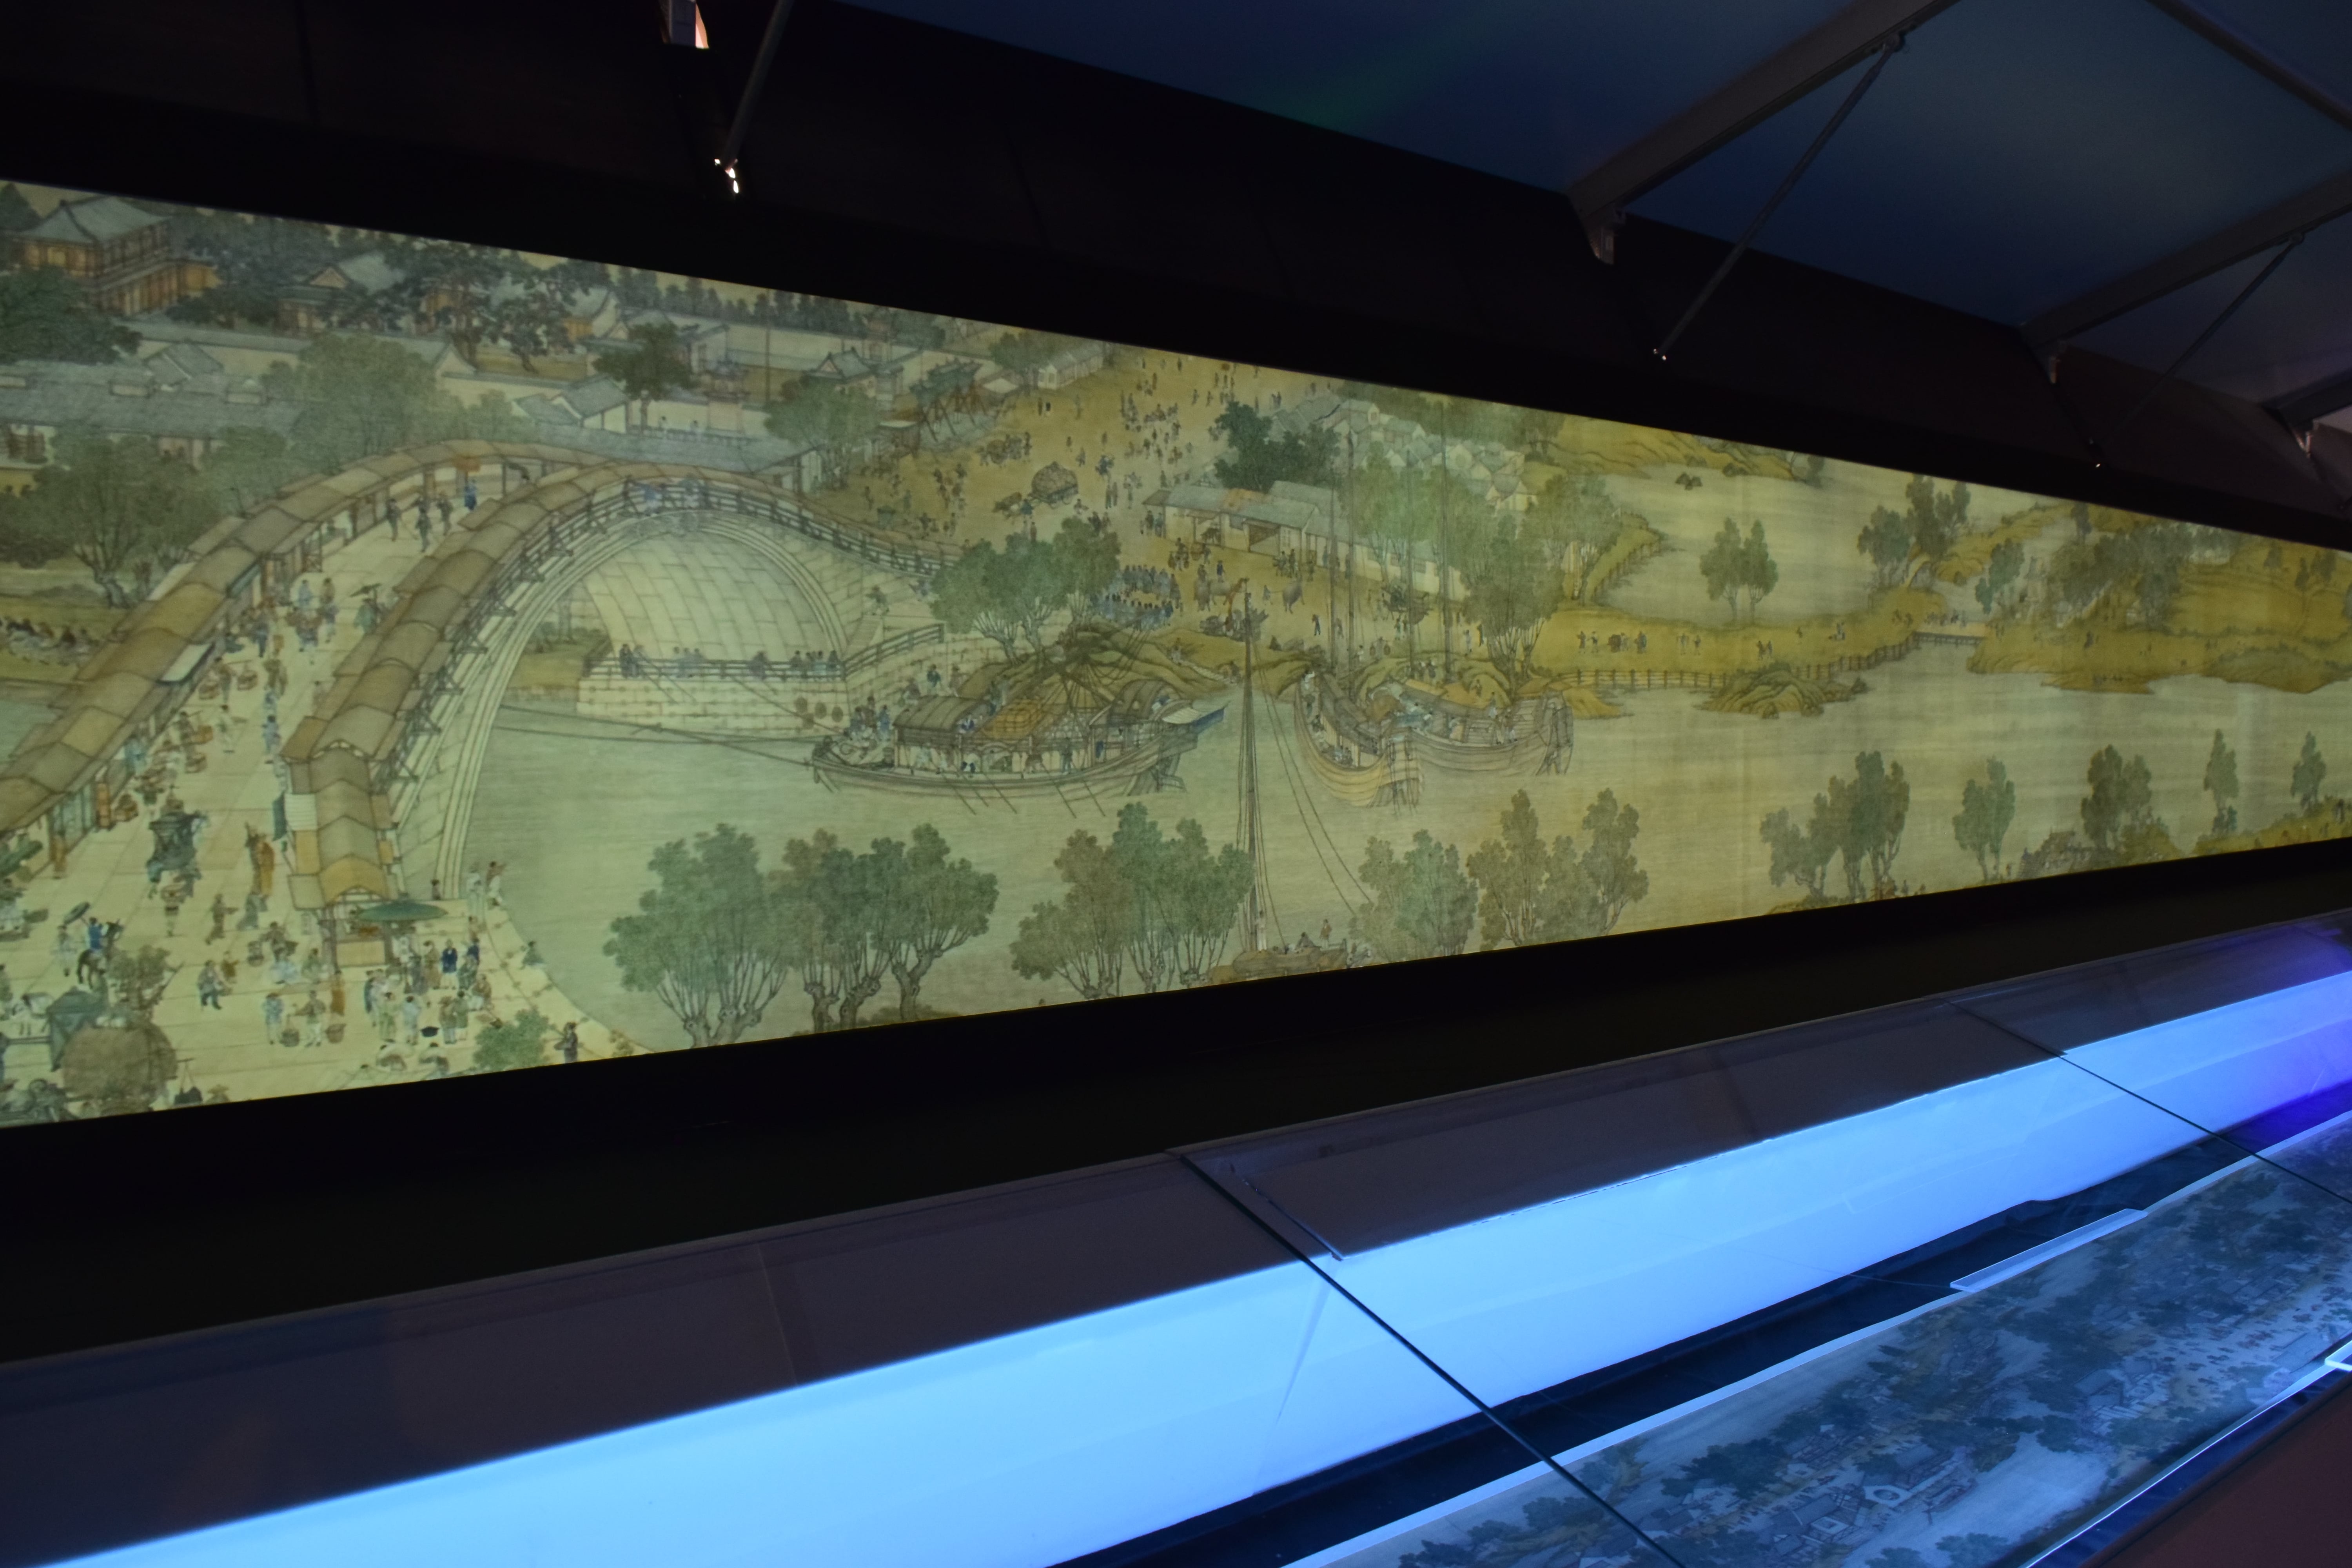 Painting Animation—Up the River During Qingming